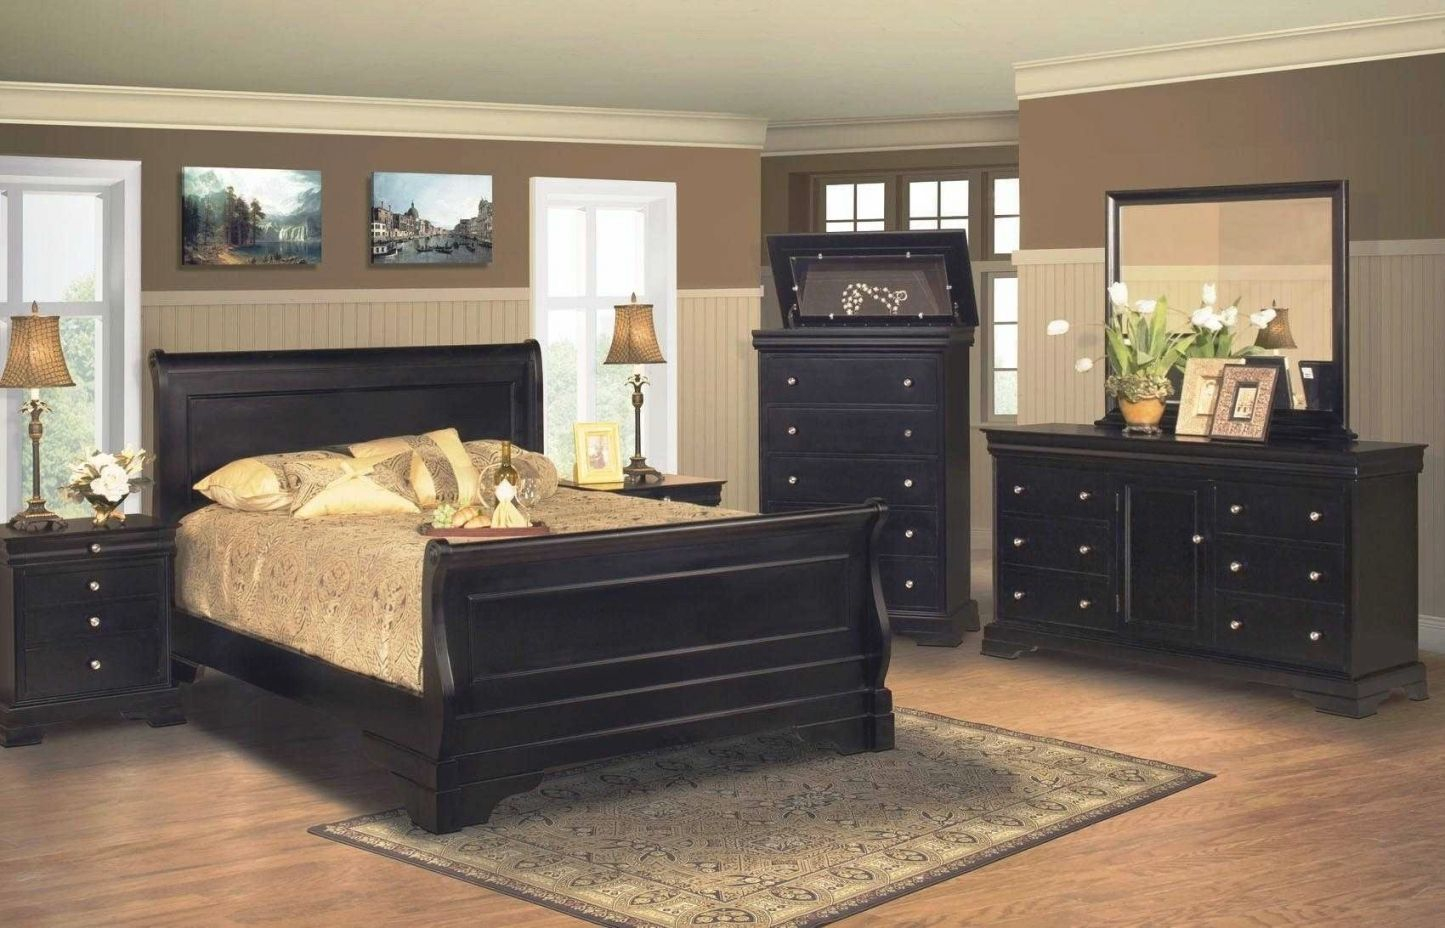 queen bed with mattress included